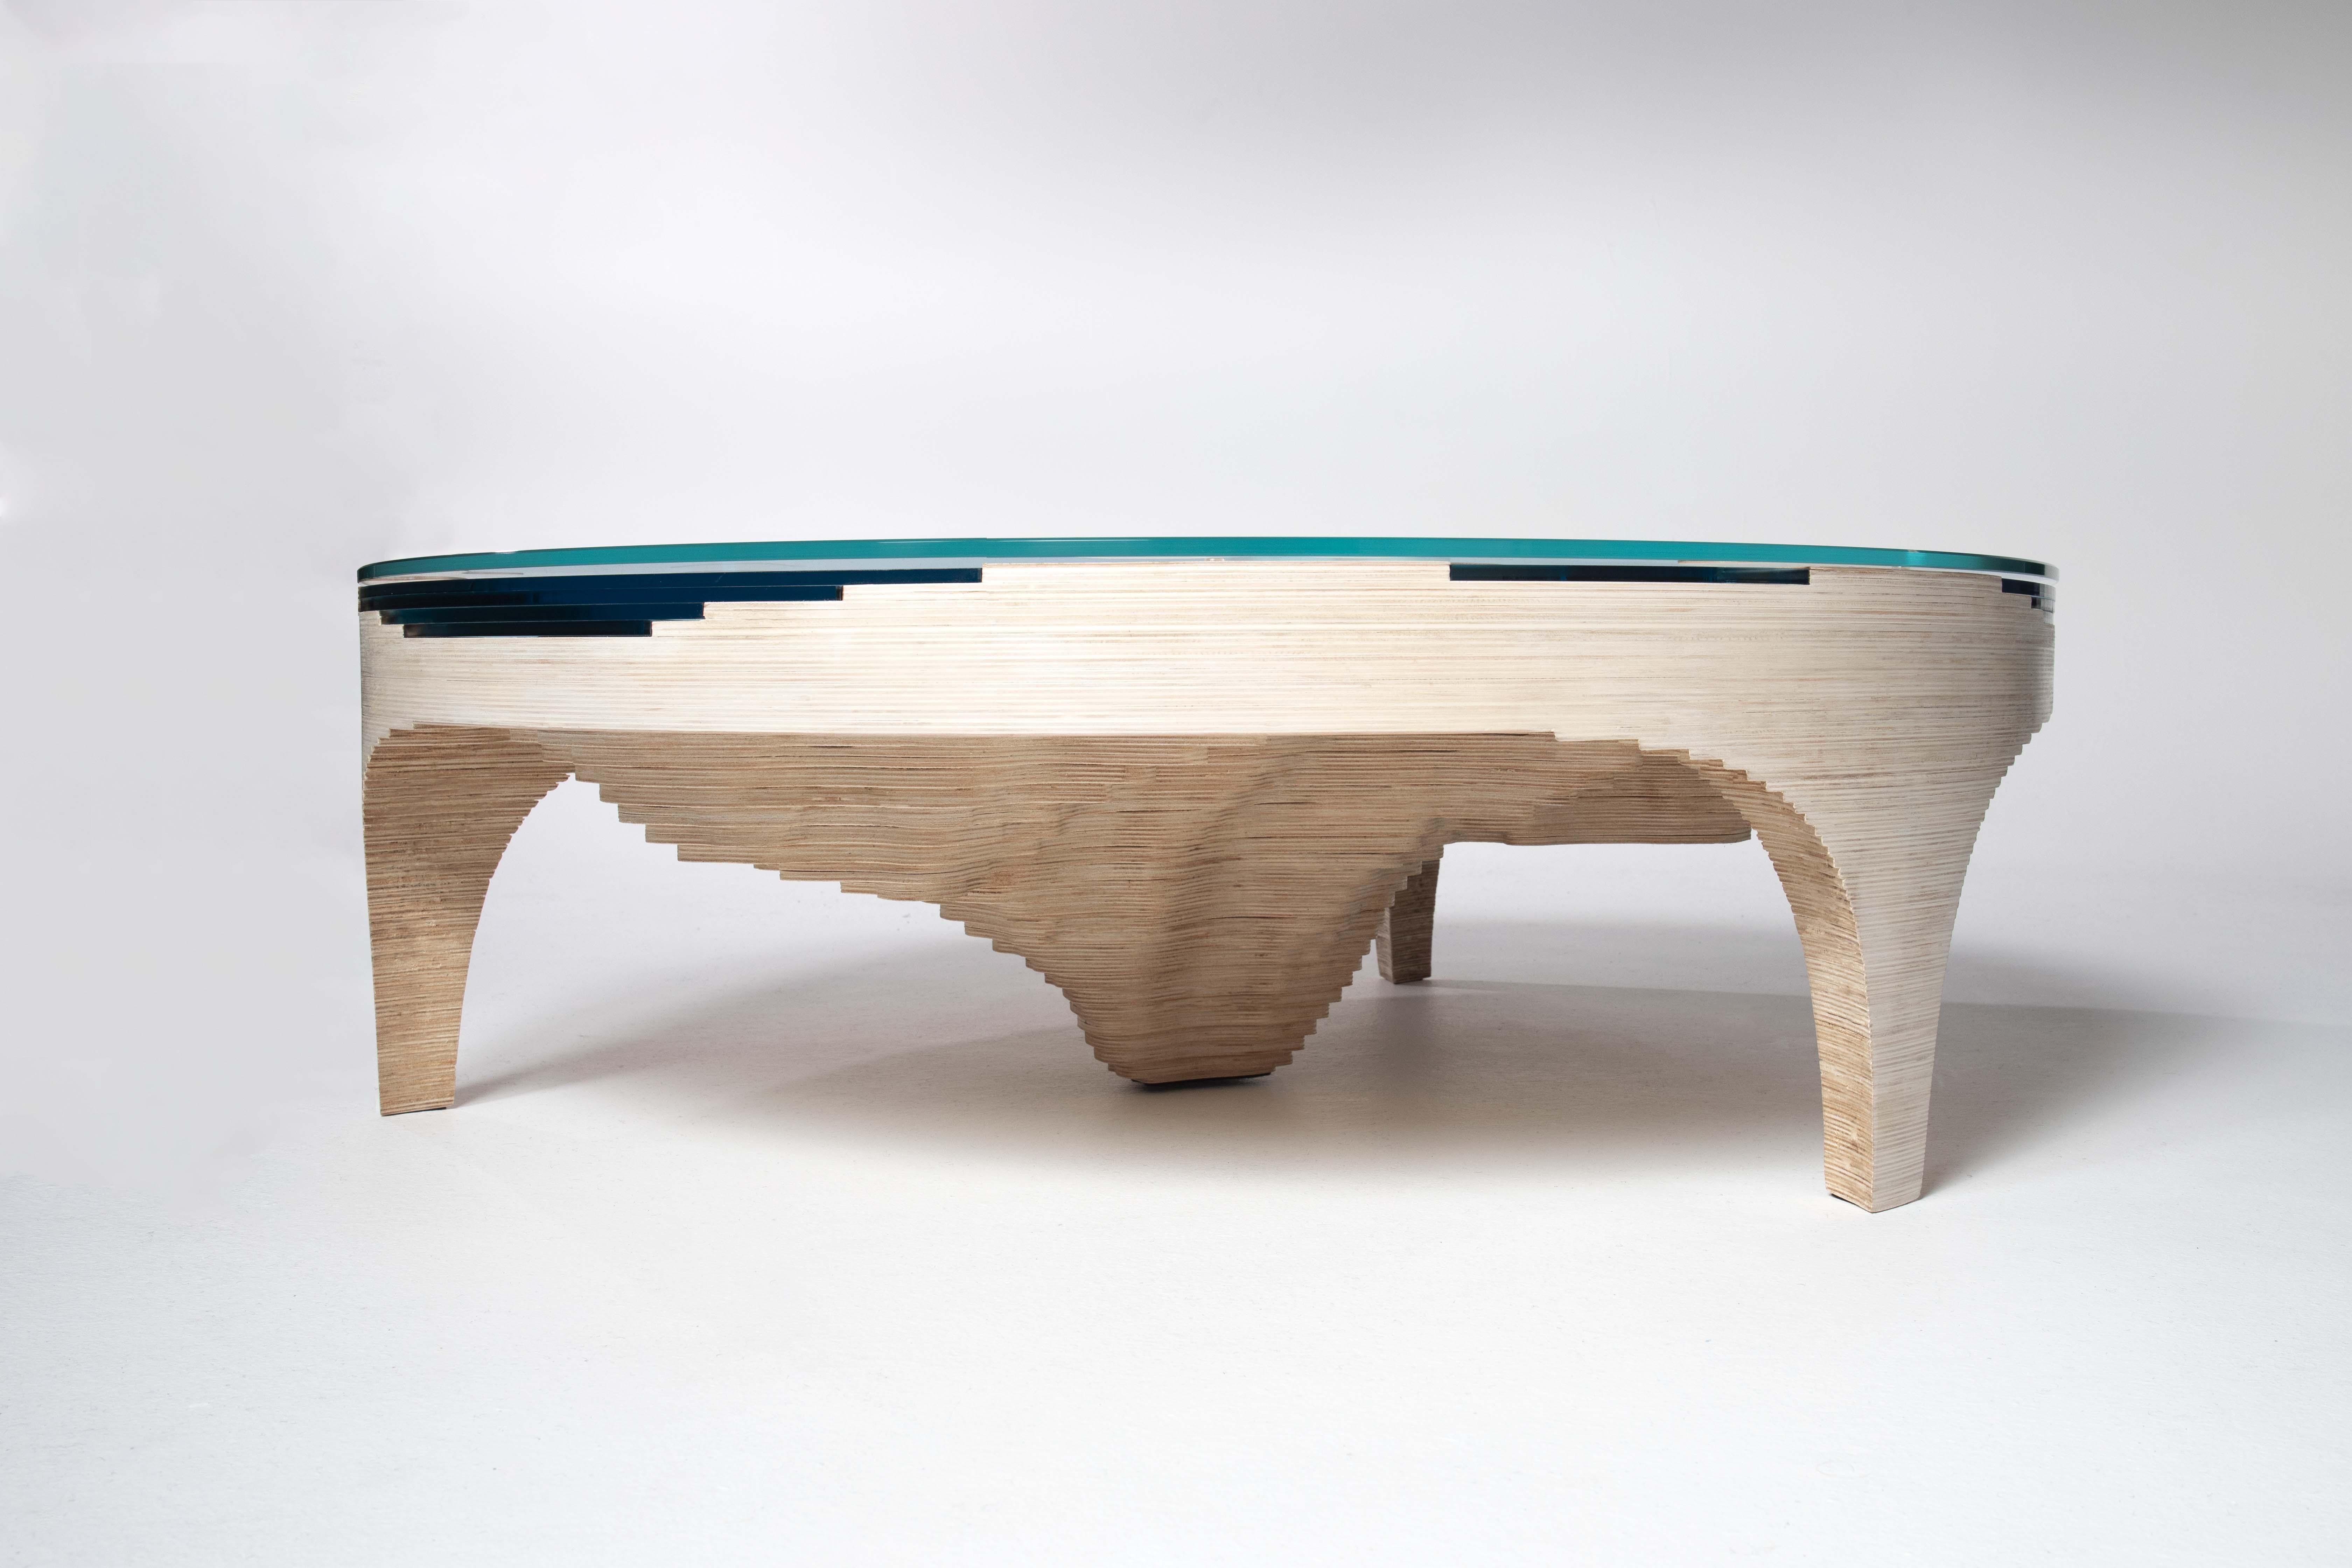 British 21st Century Birch Wood Coffee Table with Glass Table-top, Artists Proof edition For Sale